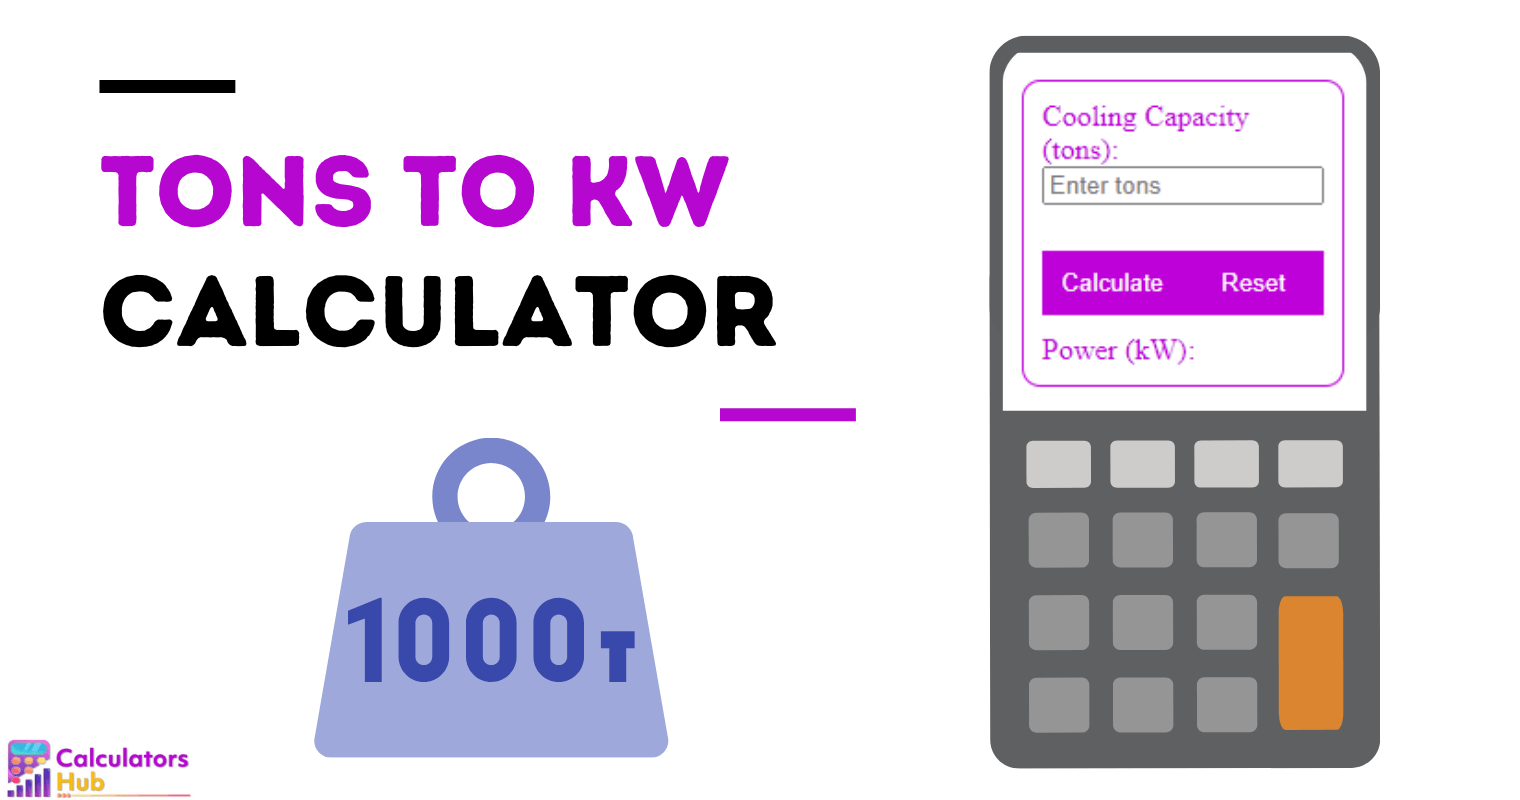 Tons to kW Calculator